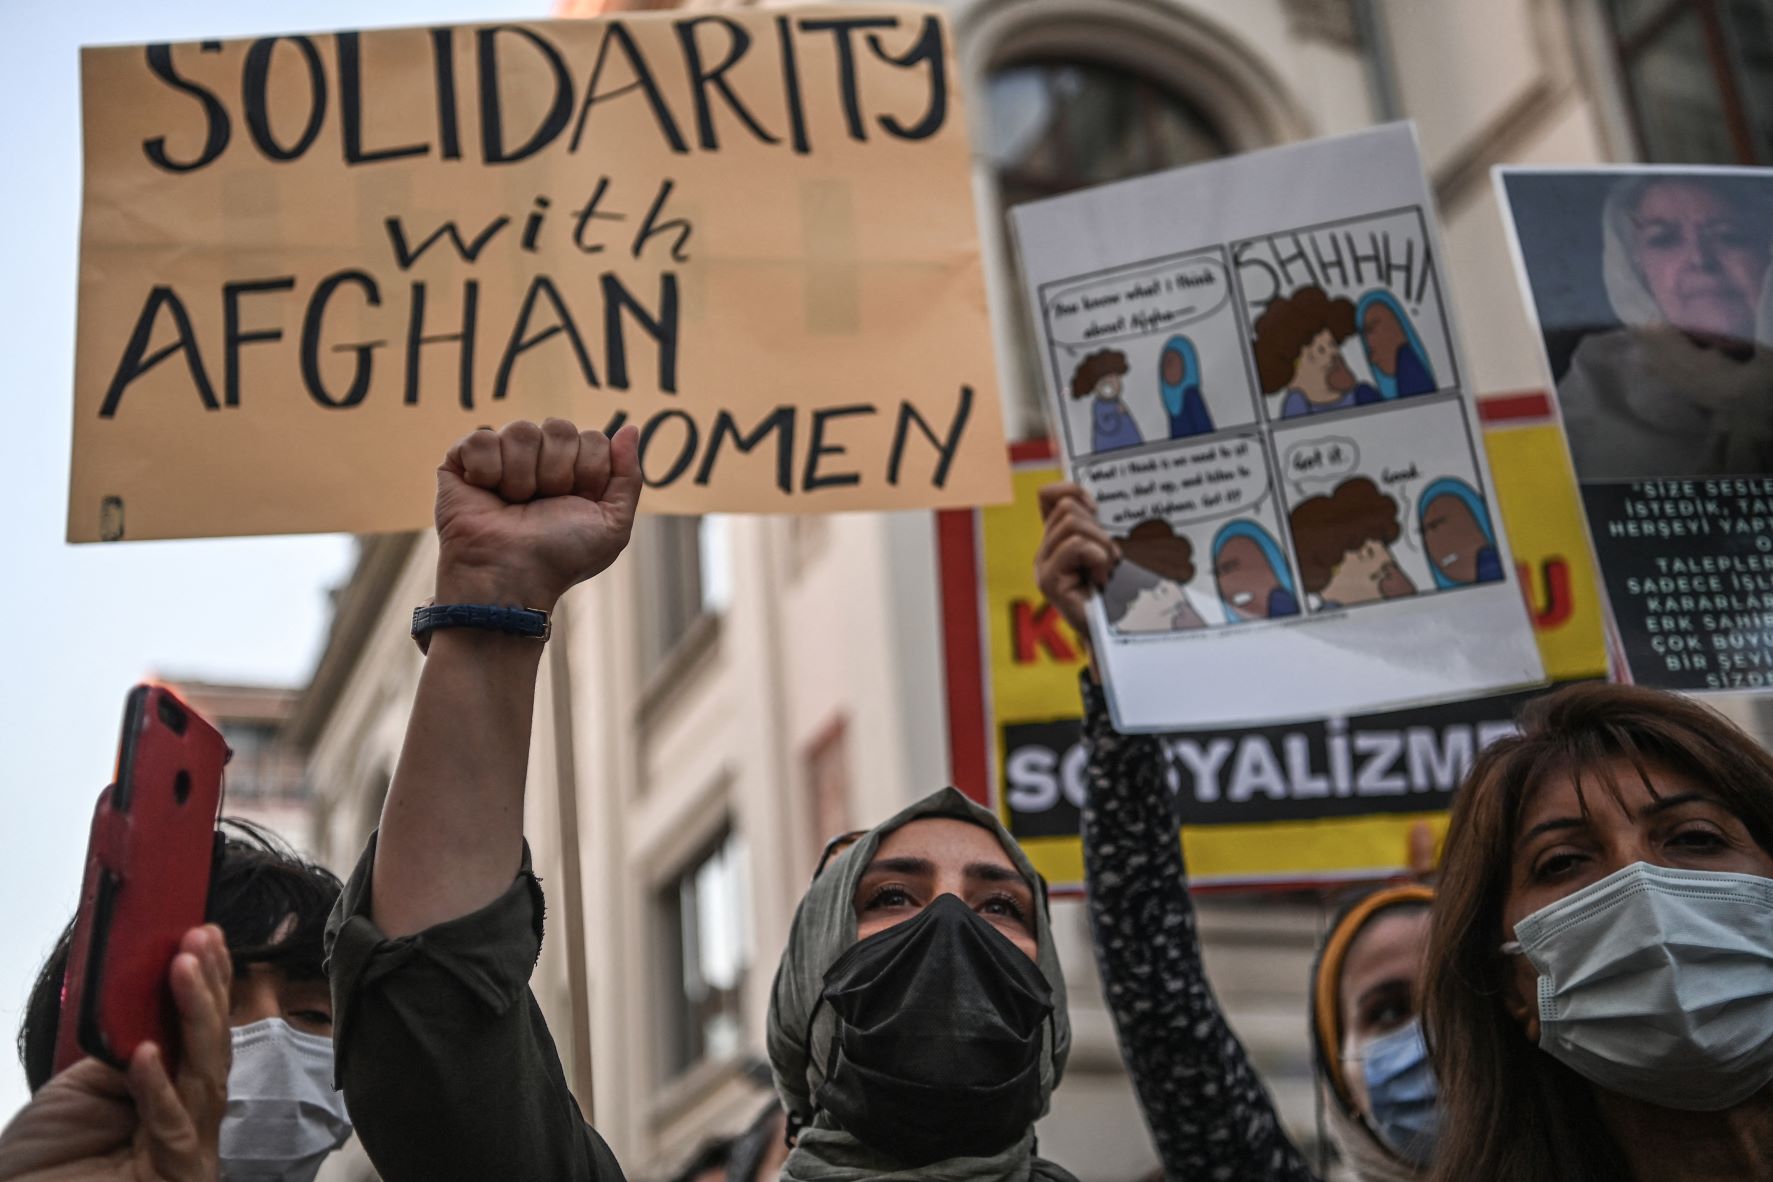 Women hold placards and shout slogans against the Taliban on August 20, 2021 in Istanbul, during a protest in solidarity to Afghan women in Afghanistan after the Taliban takeover (AFP)